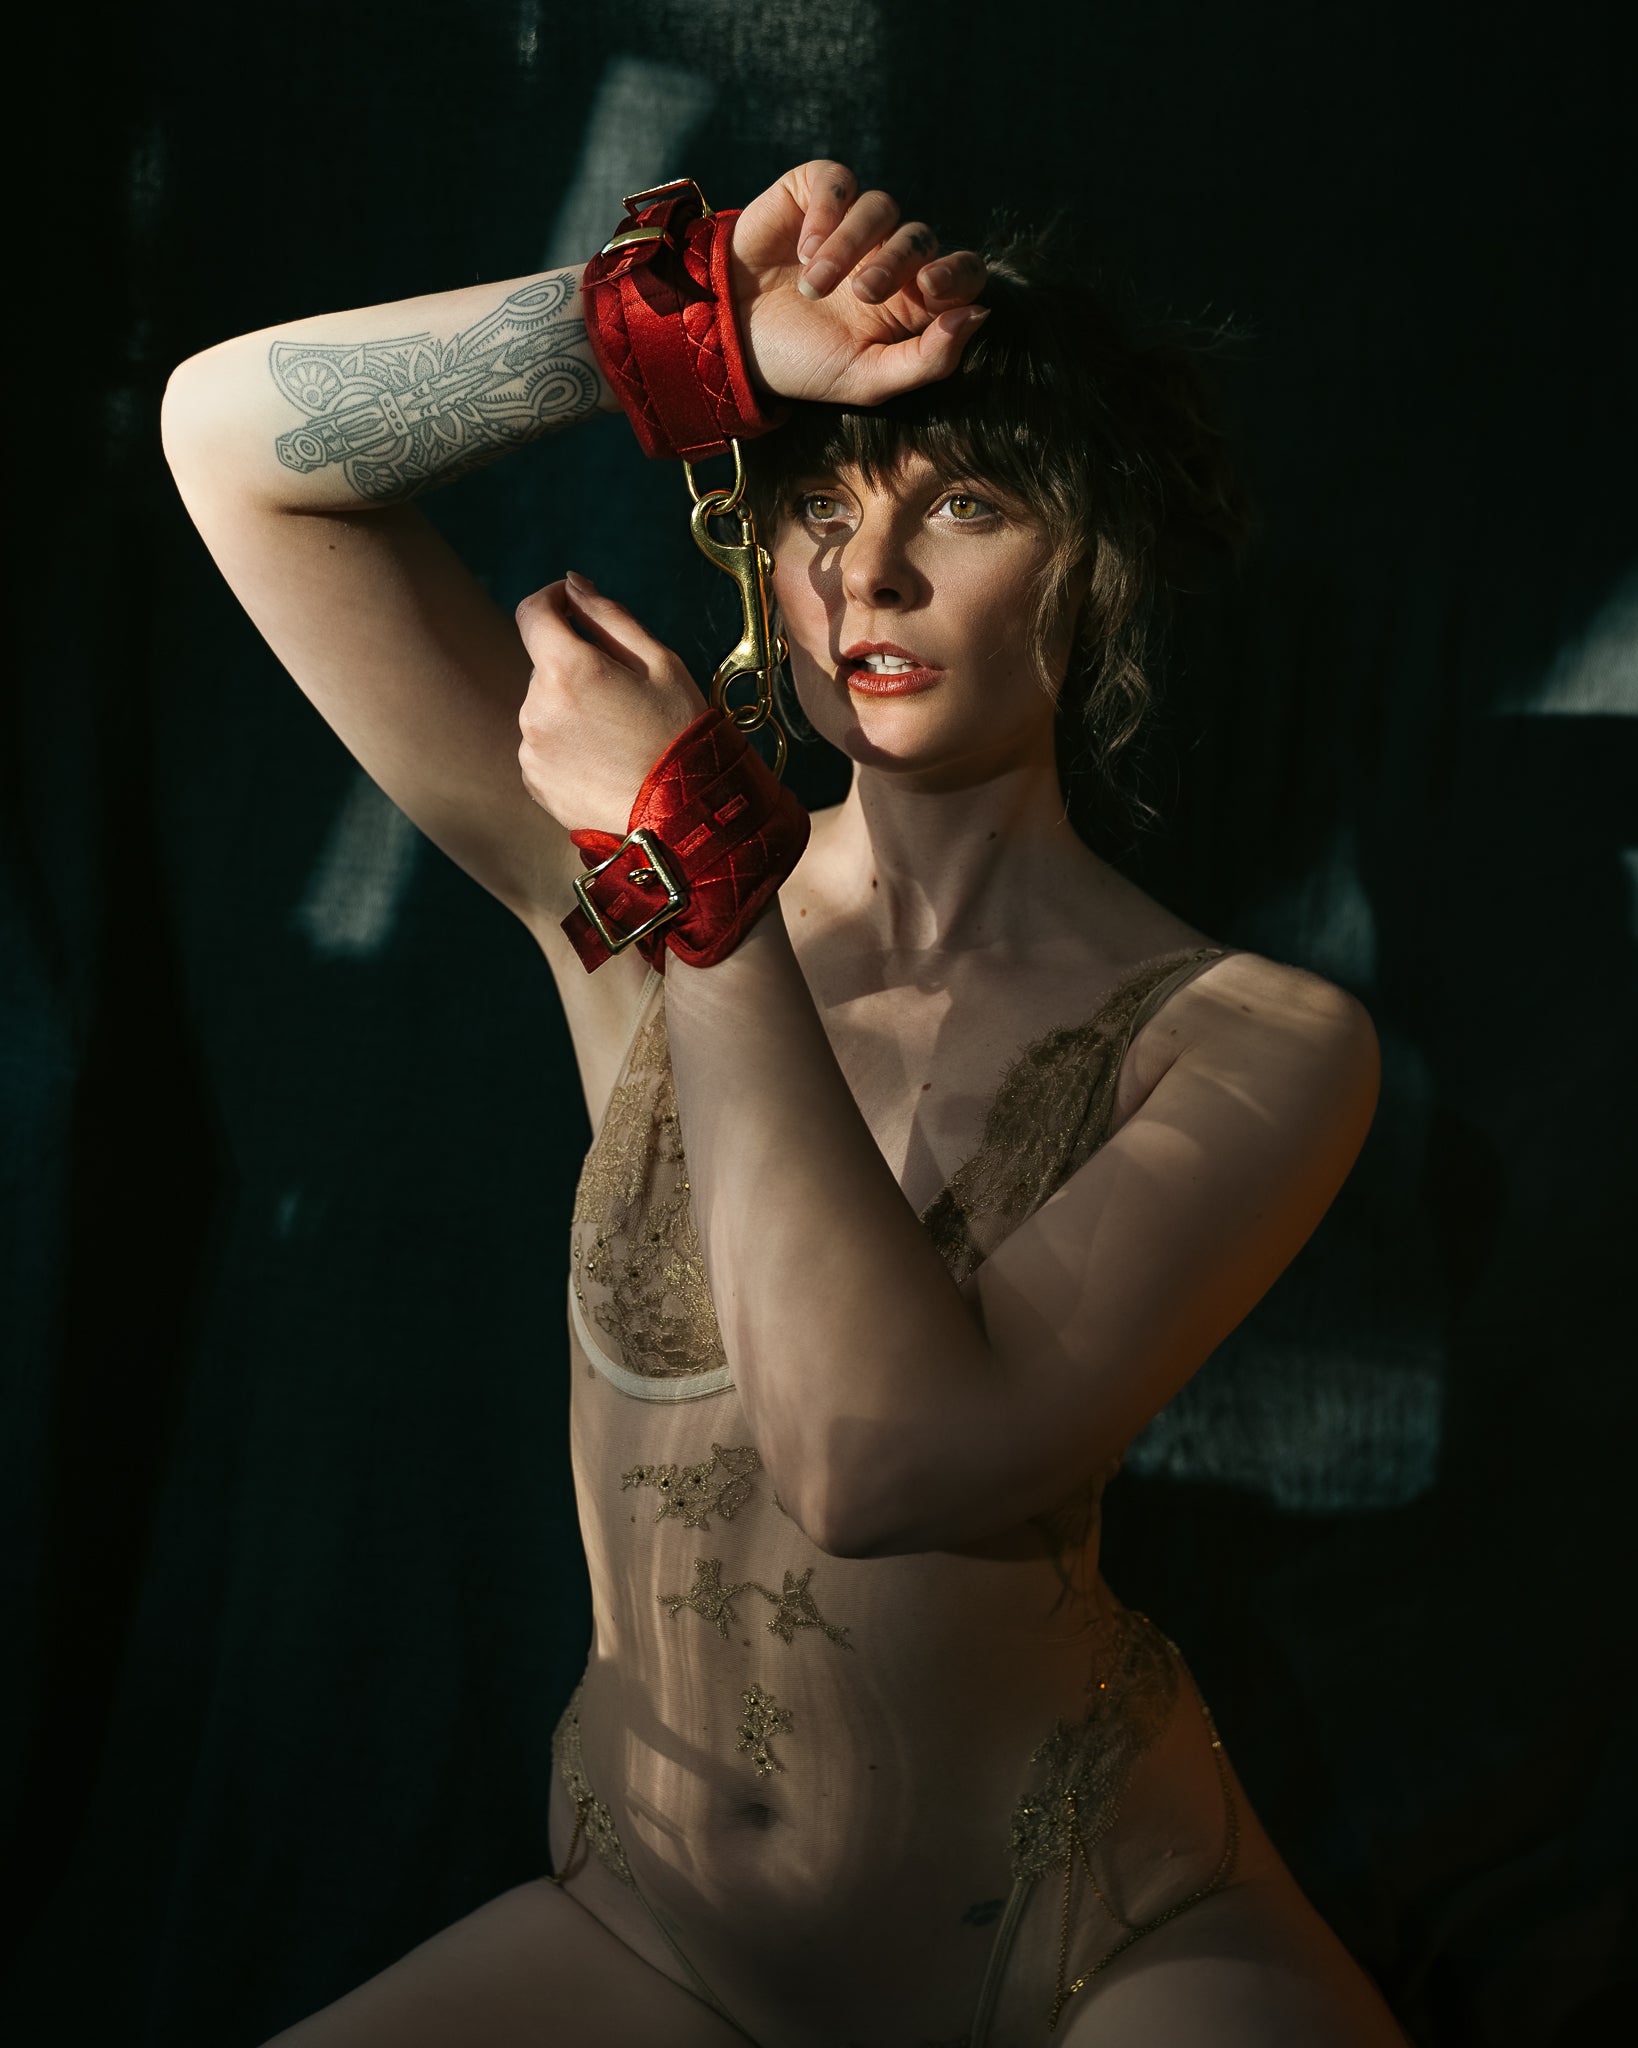 Model wears the red Morgan wrist cuffs with gold lingerie